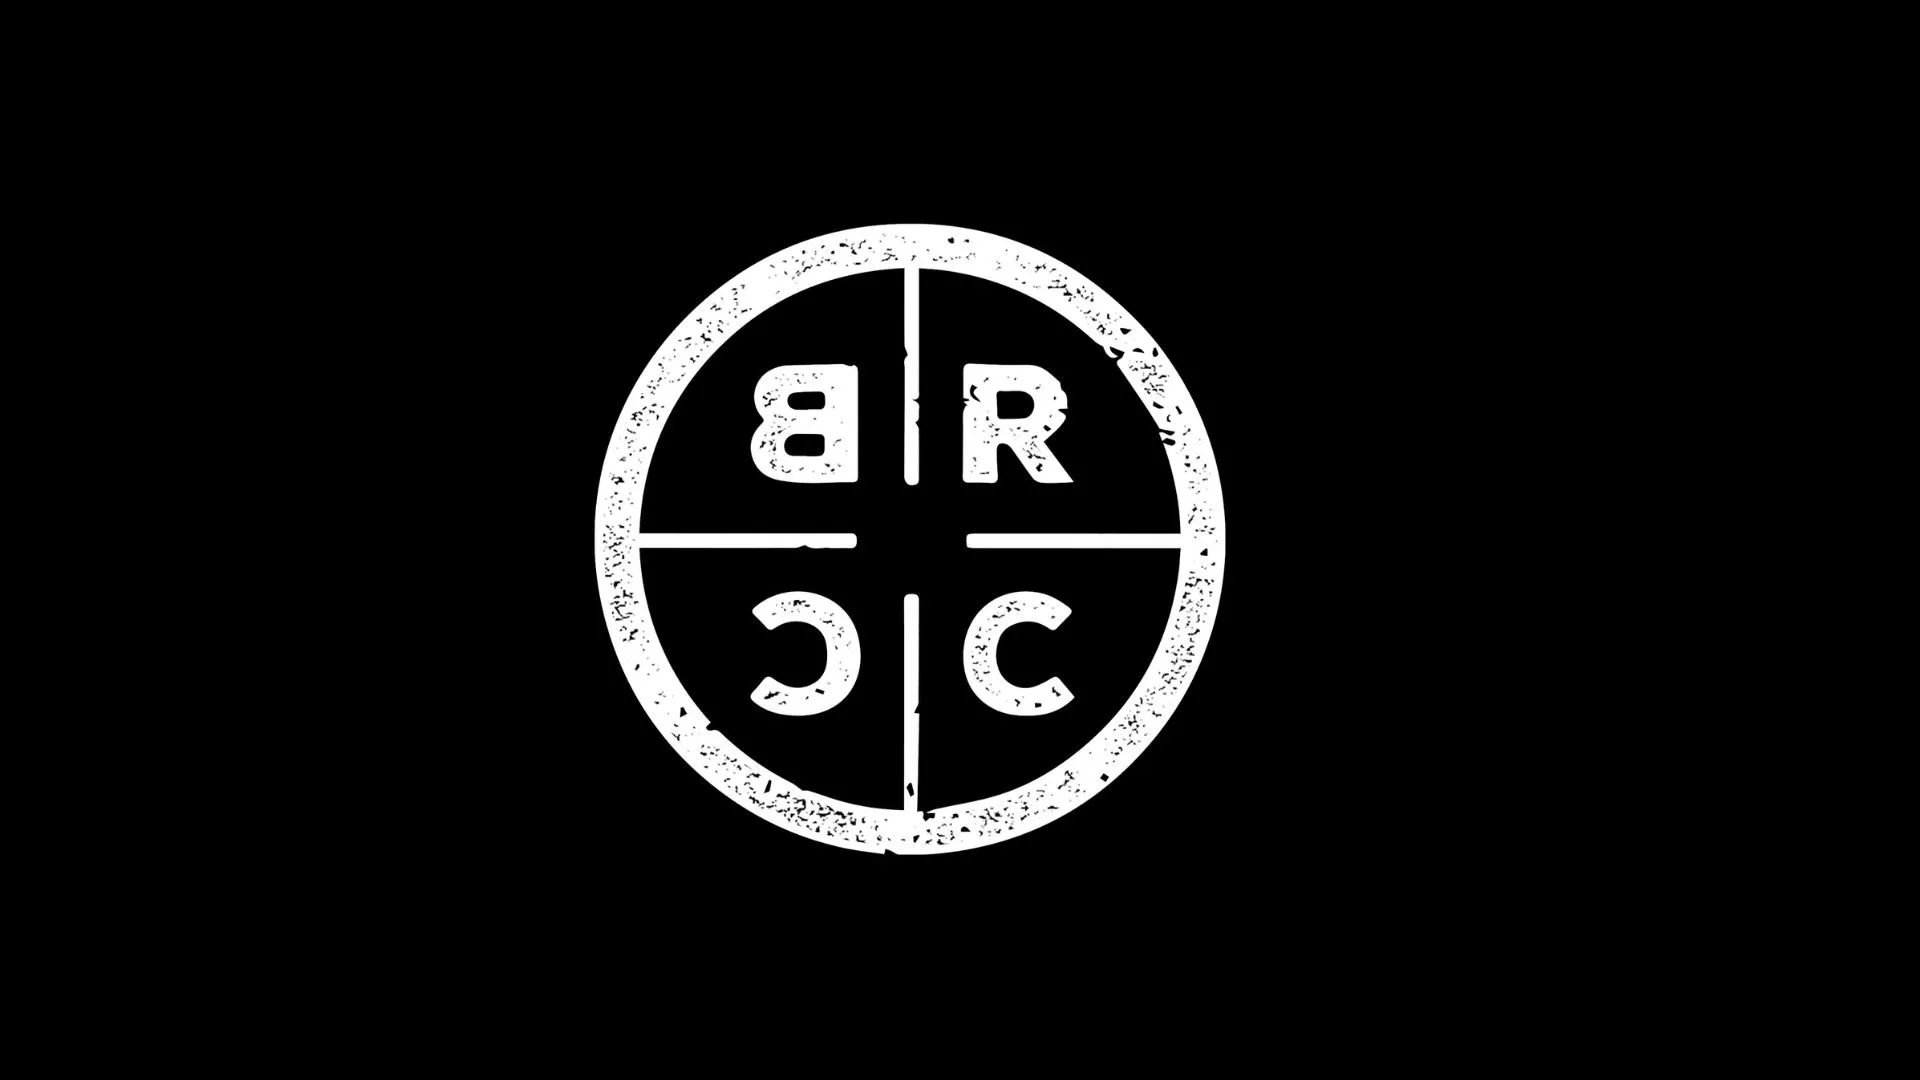 Who is the Owner of Black Rifle Coffee?